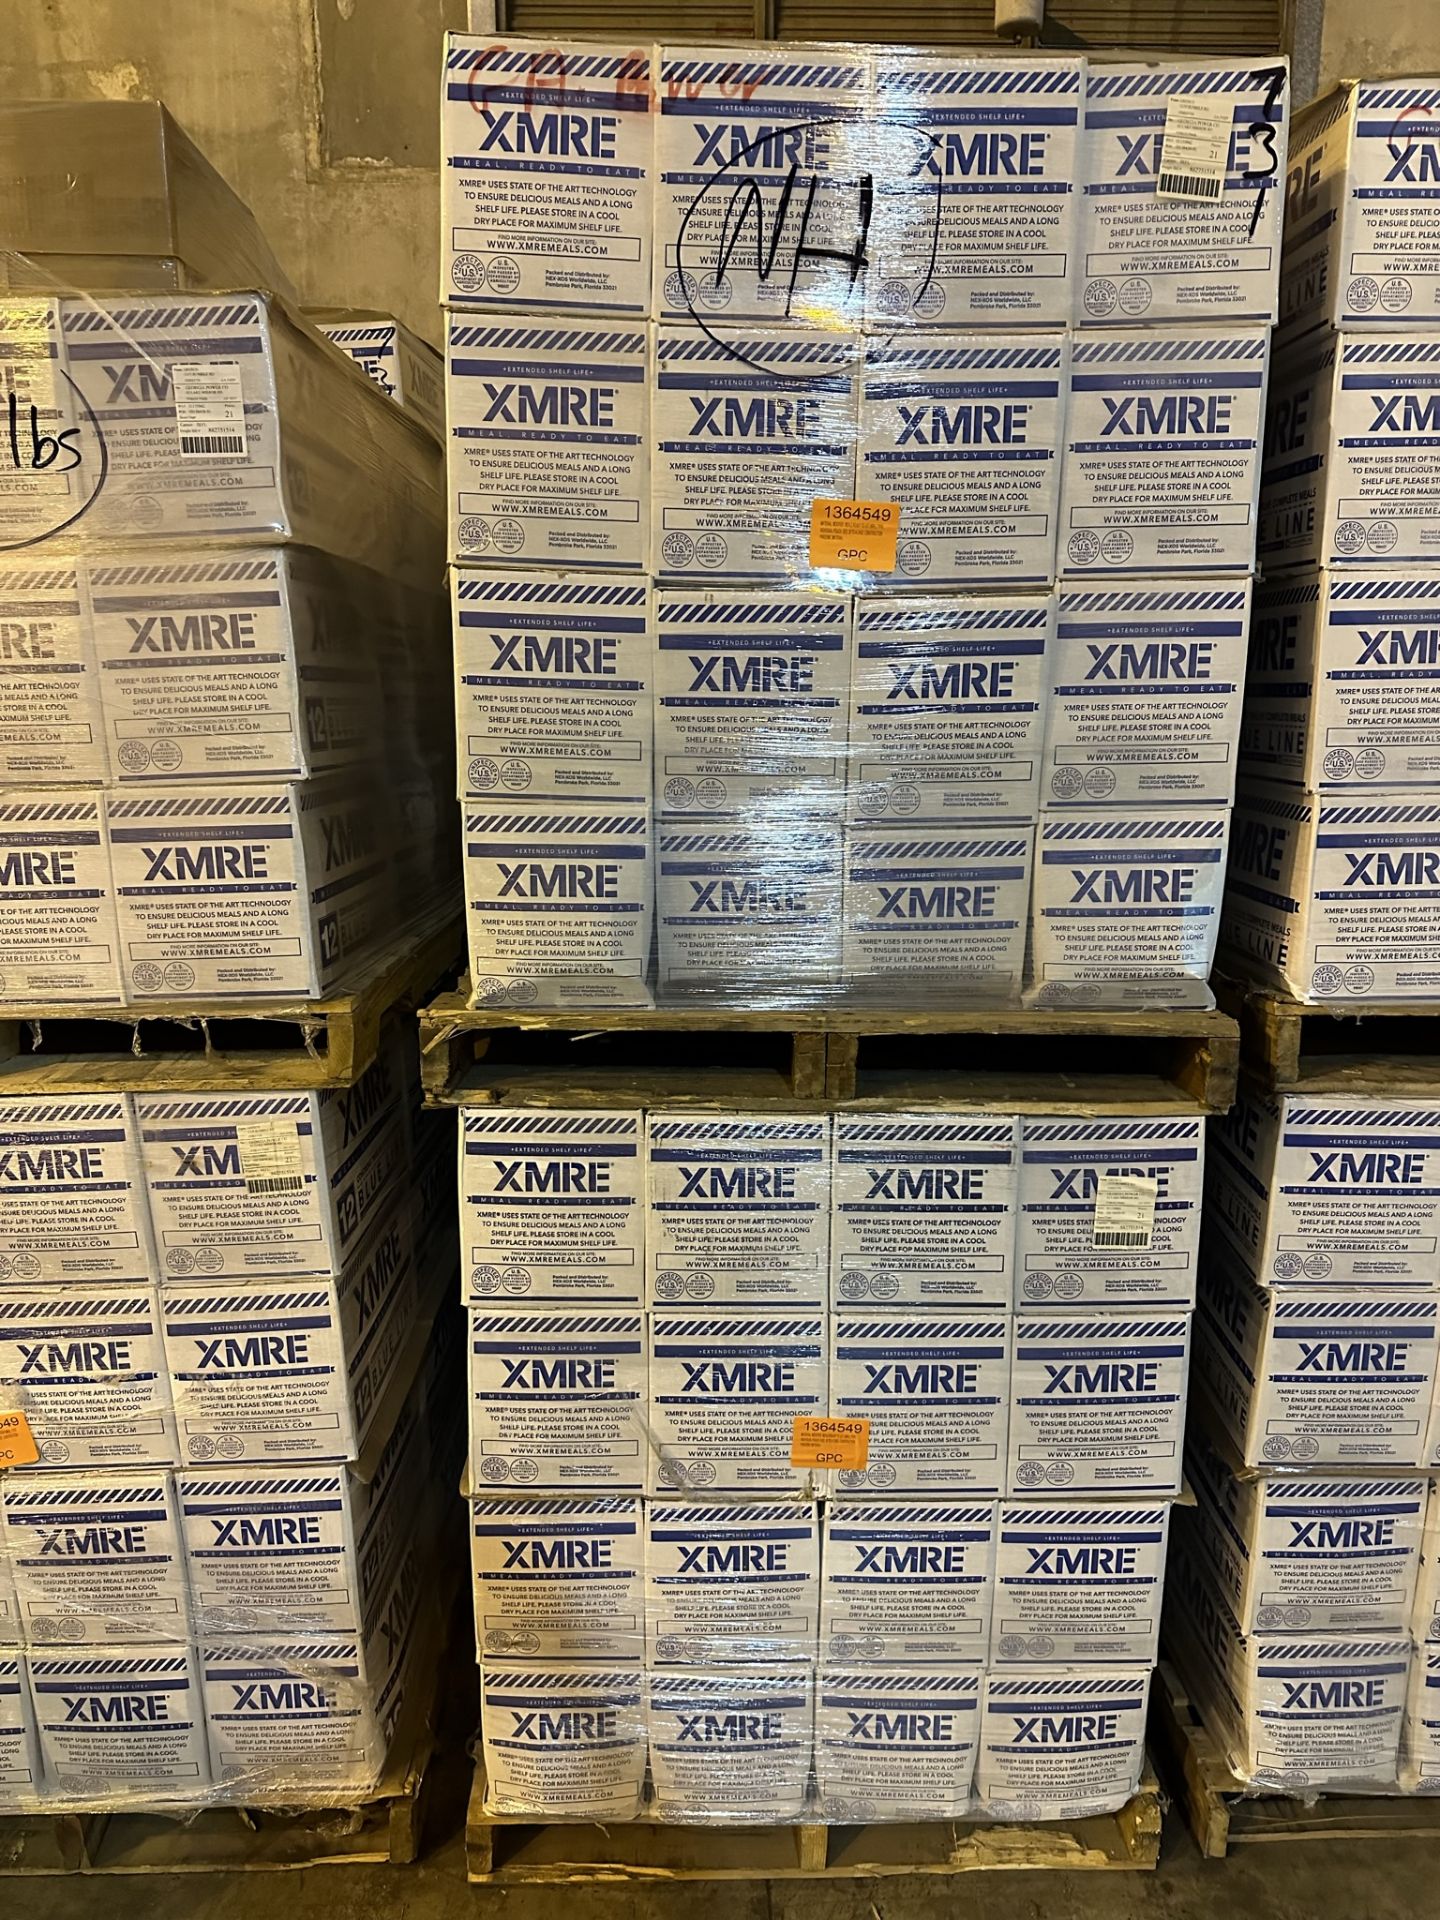 Lot of (48) Cases of XMRE Meals - Extended Shelf Life Meal, Ready to Eat - Image 15 of 15